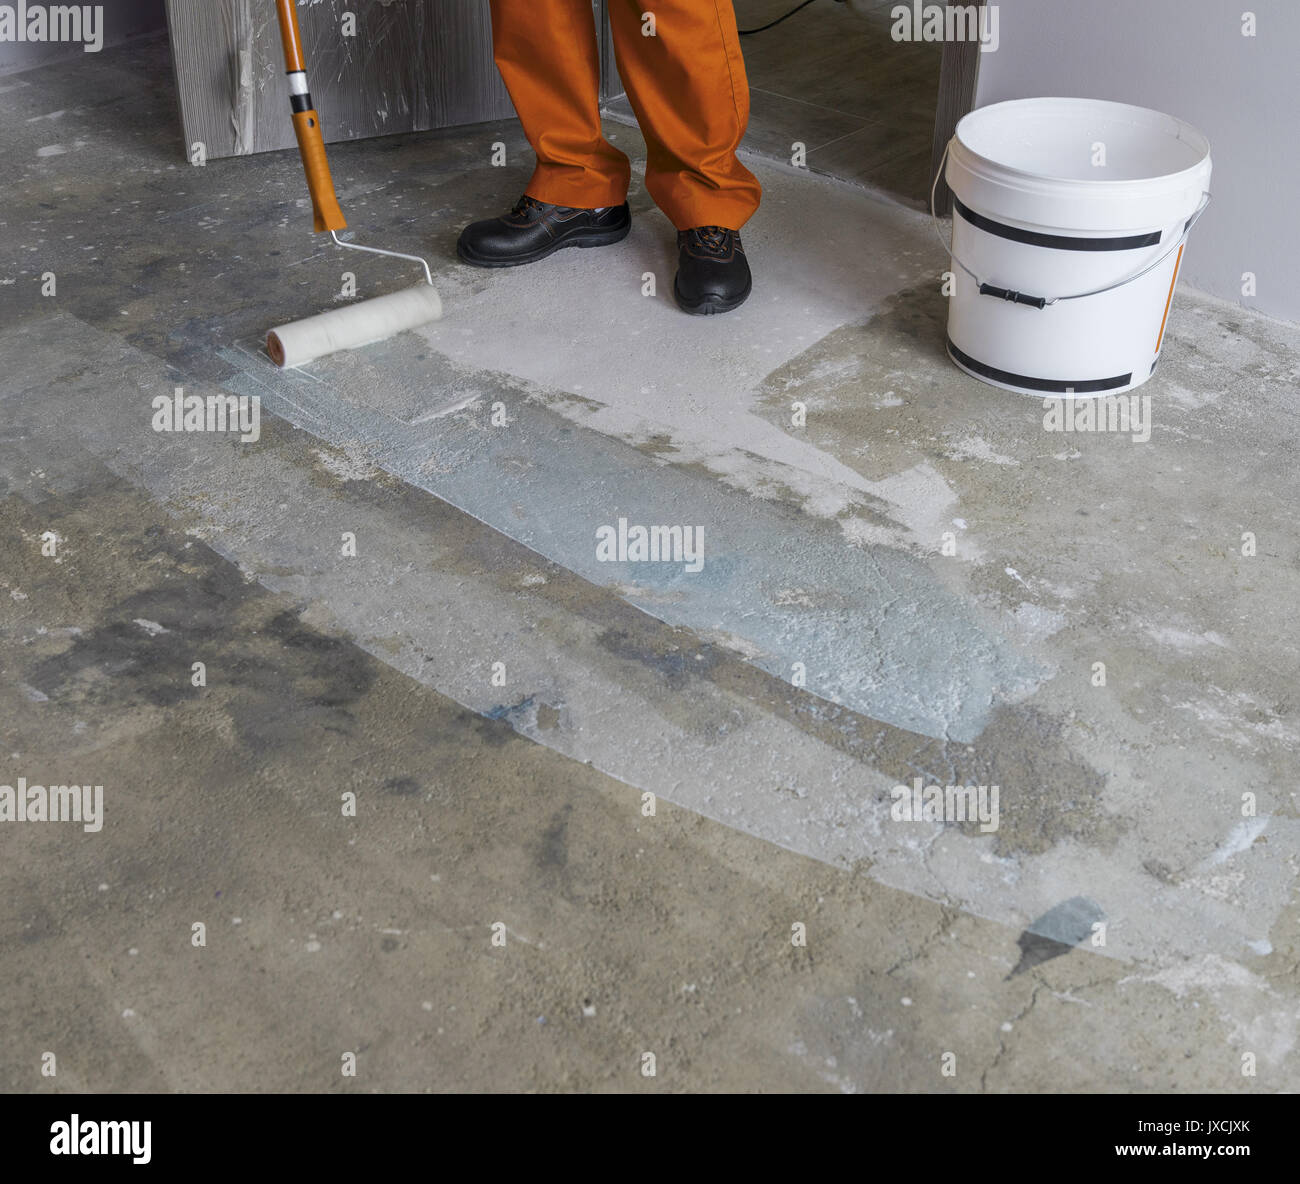 Renovation of partment. Worker puts primer with roller on concrete floor Stock Photo